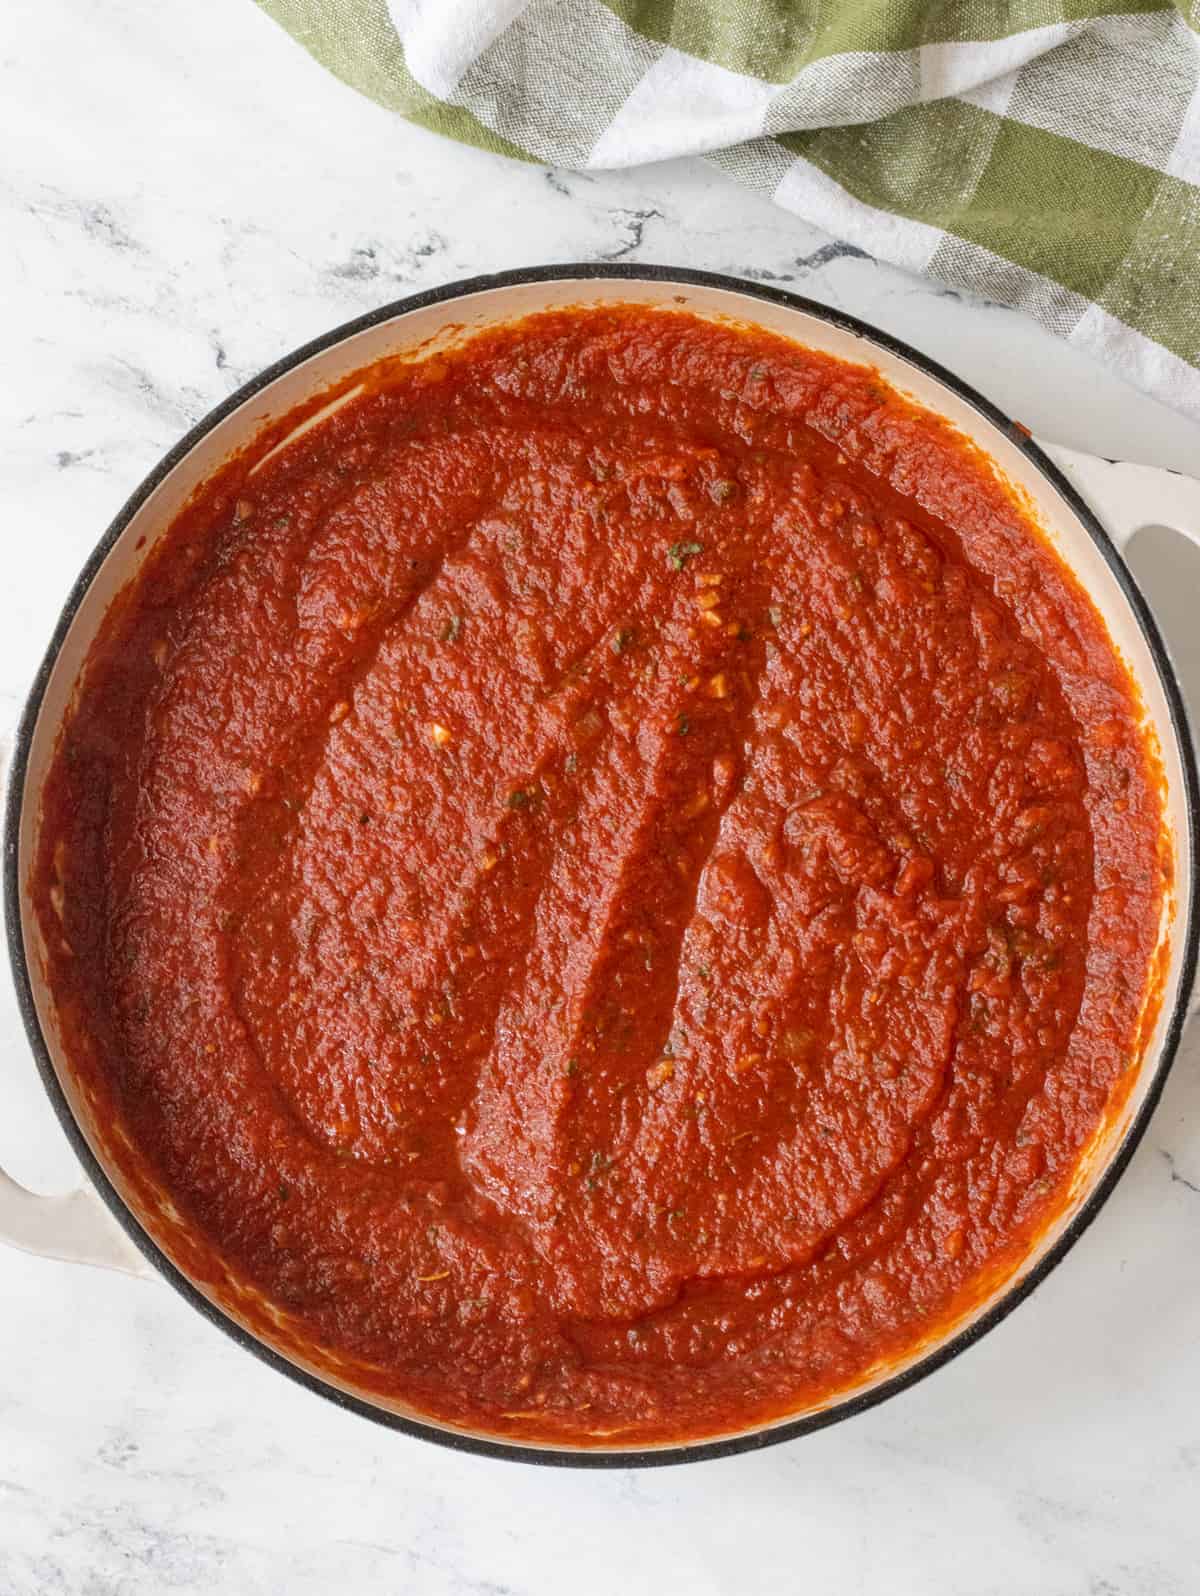 Tomato sauce in a skillet next to a towel.